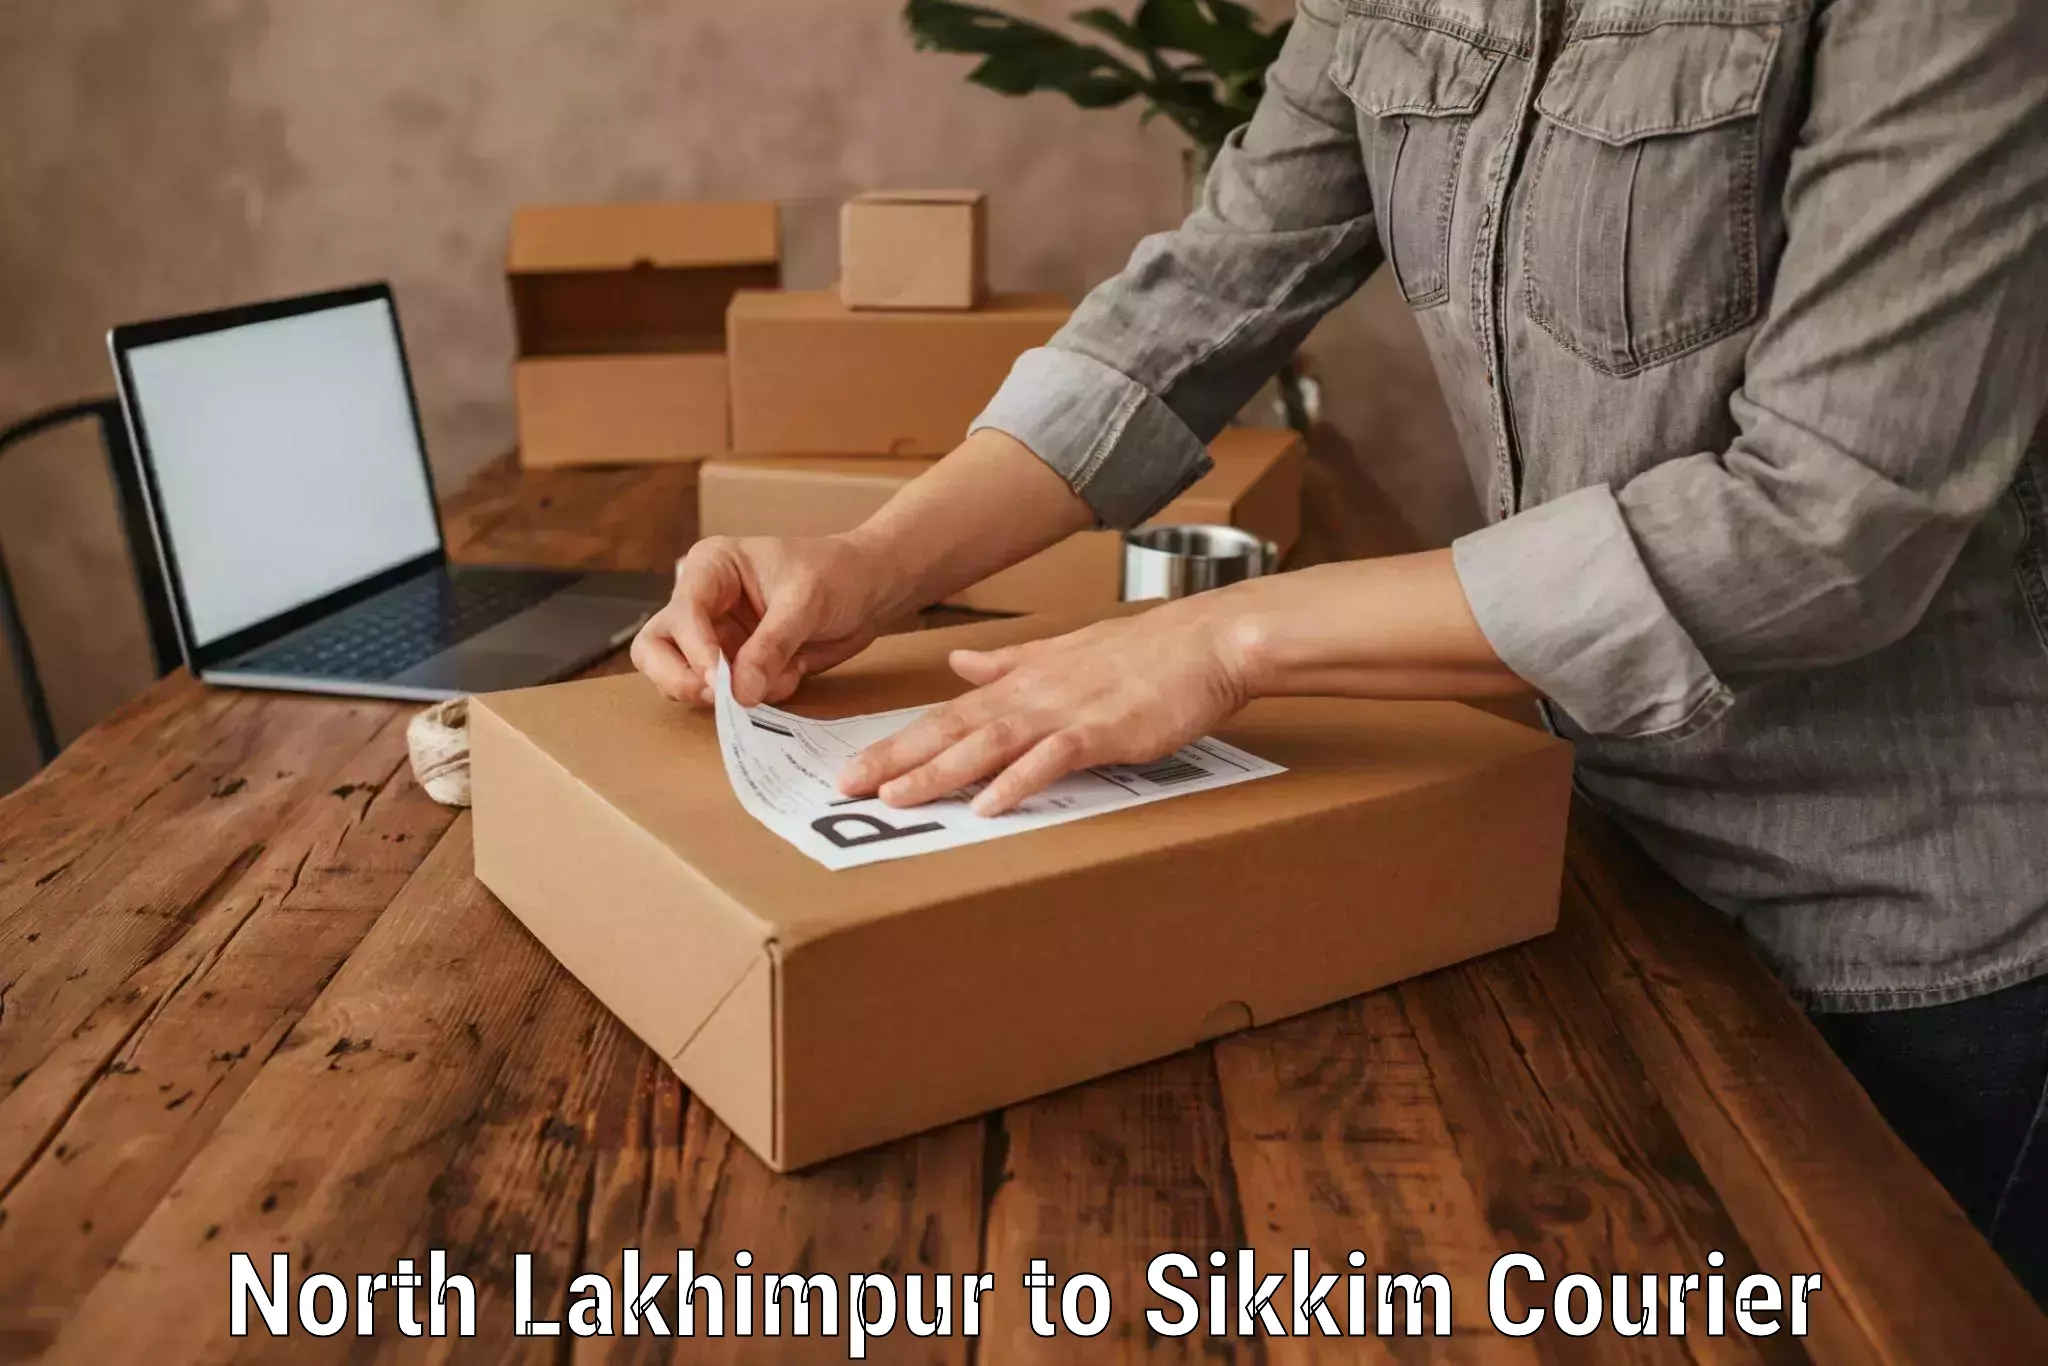 Luggage shipment specialists North Lakhimpur to East Sikkim